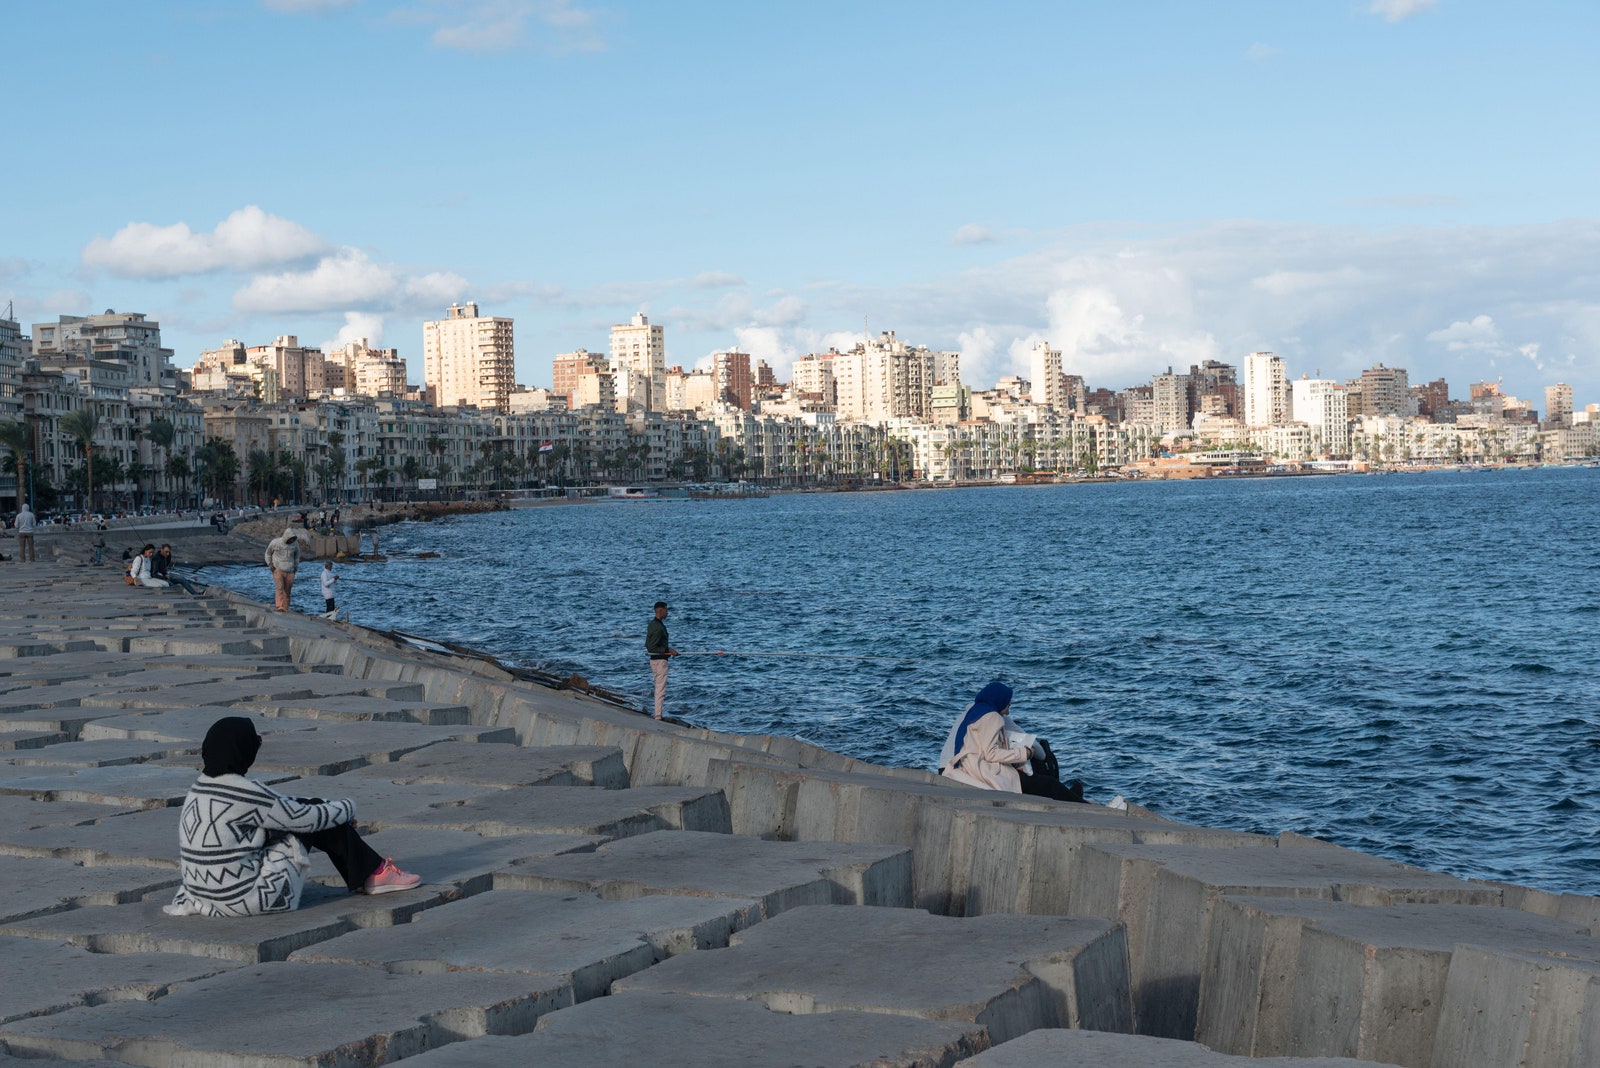 The Corniche of Alexandria is lined with flood defences